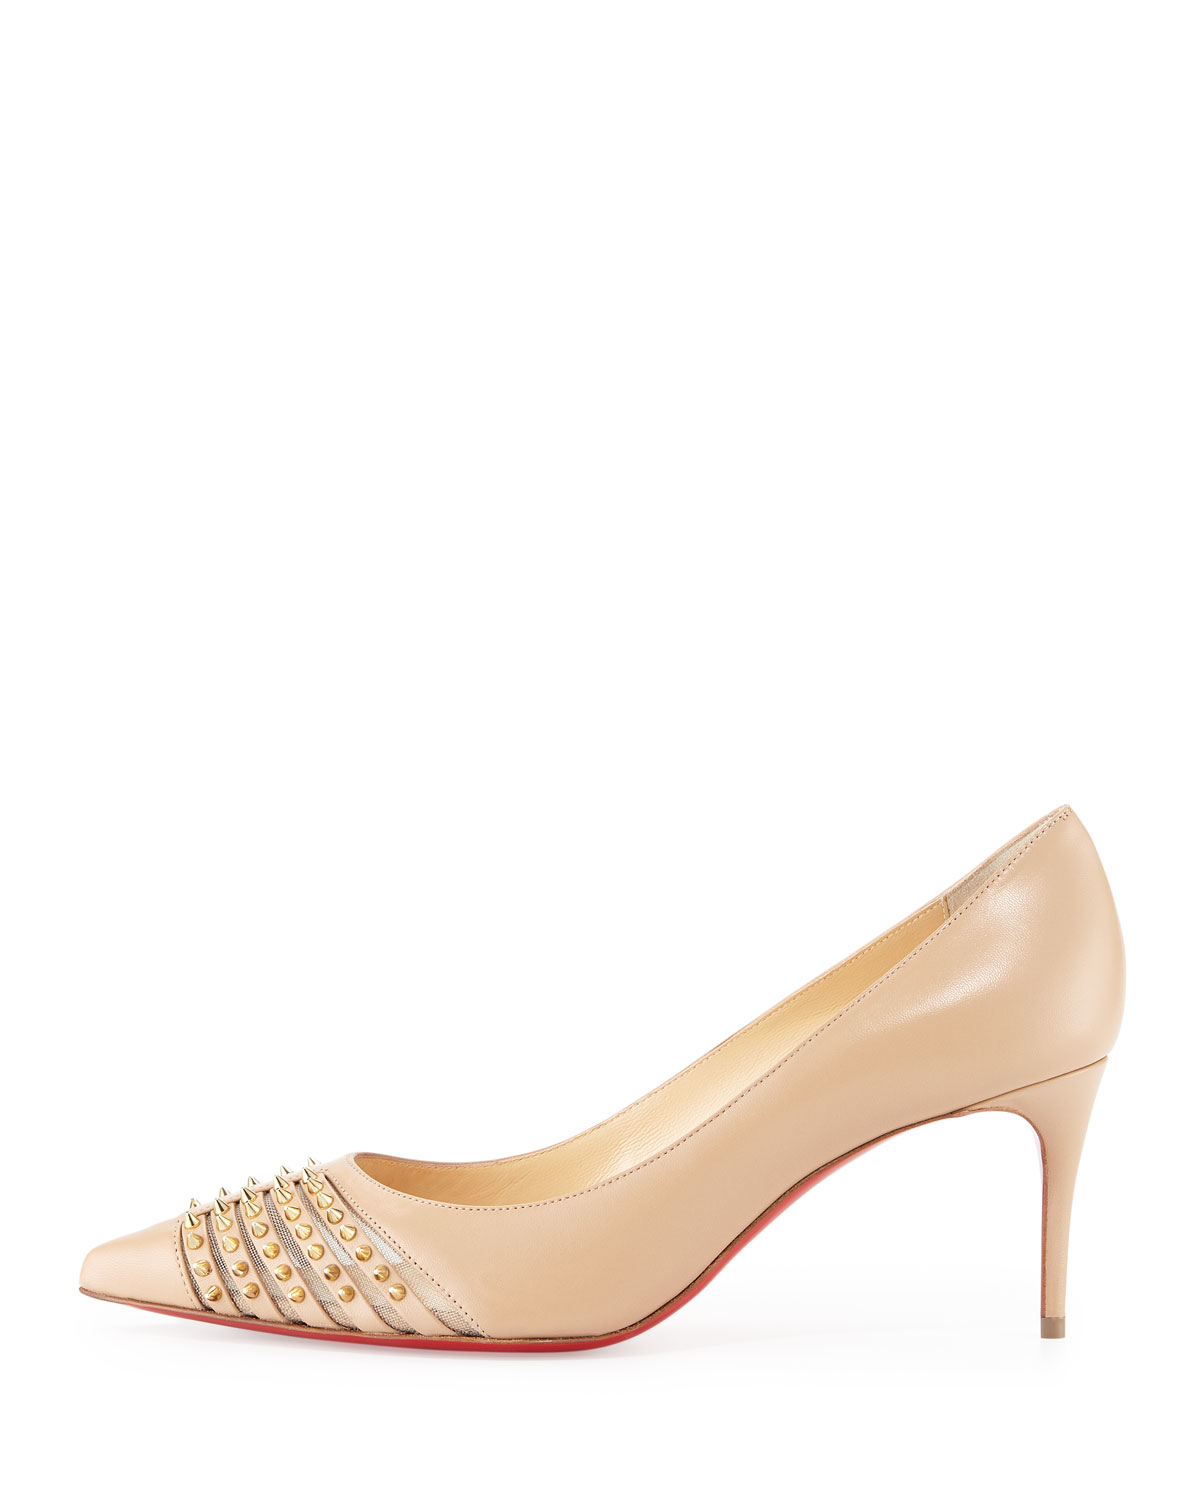 Christian louboutin Bareta Studded Cut-Out Leather Pumps in Pink ...